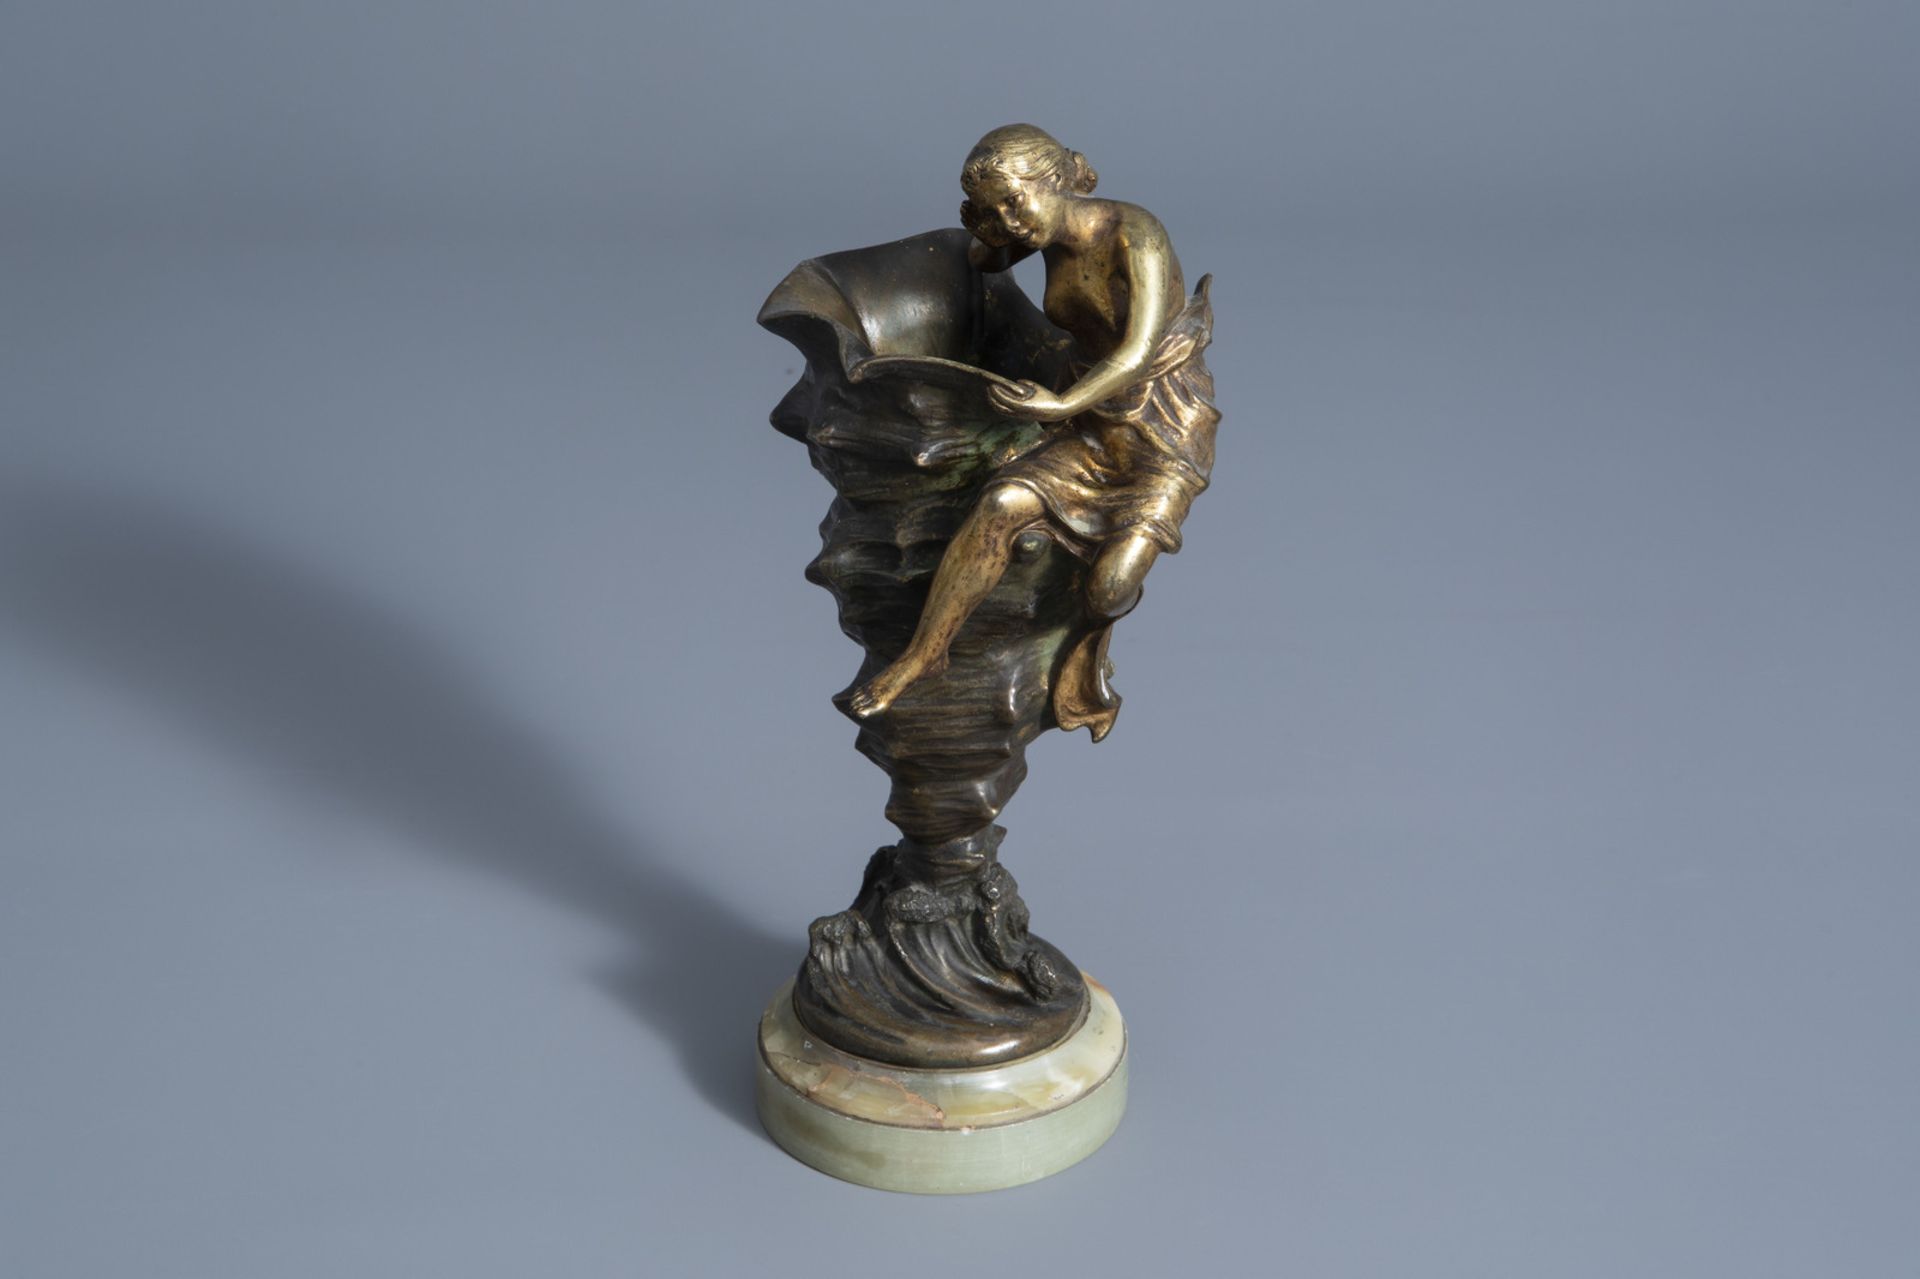 Joe Descomps (1869-1950): Rustling of the water, patinated bronze on an onyx marble base